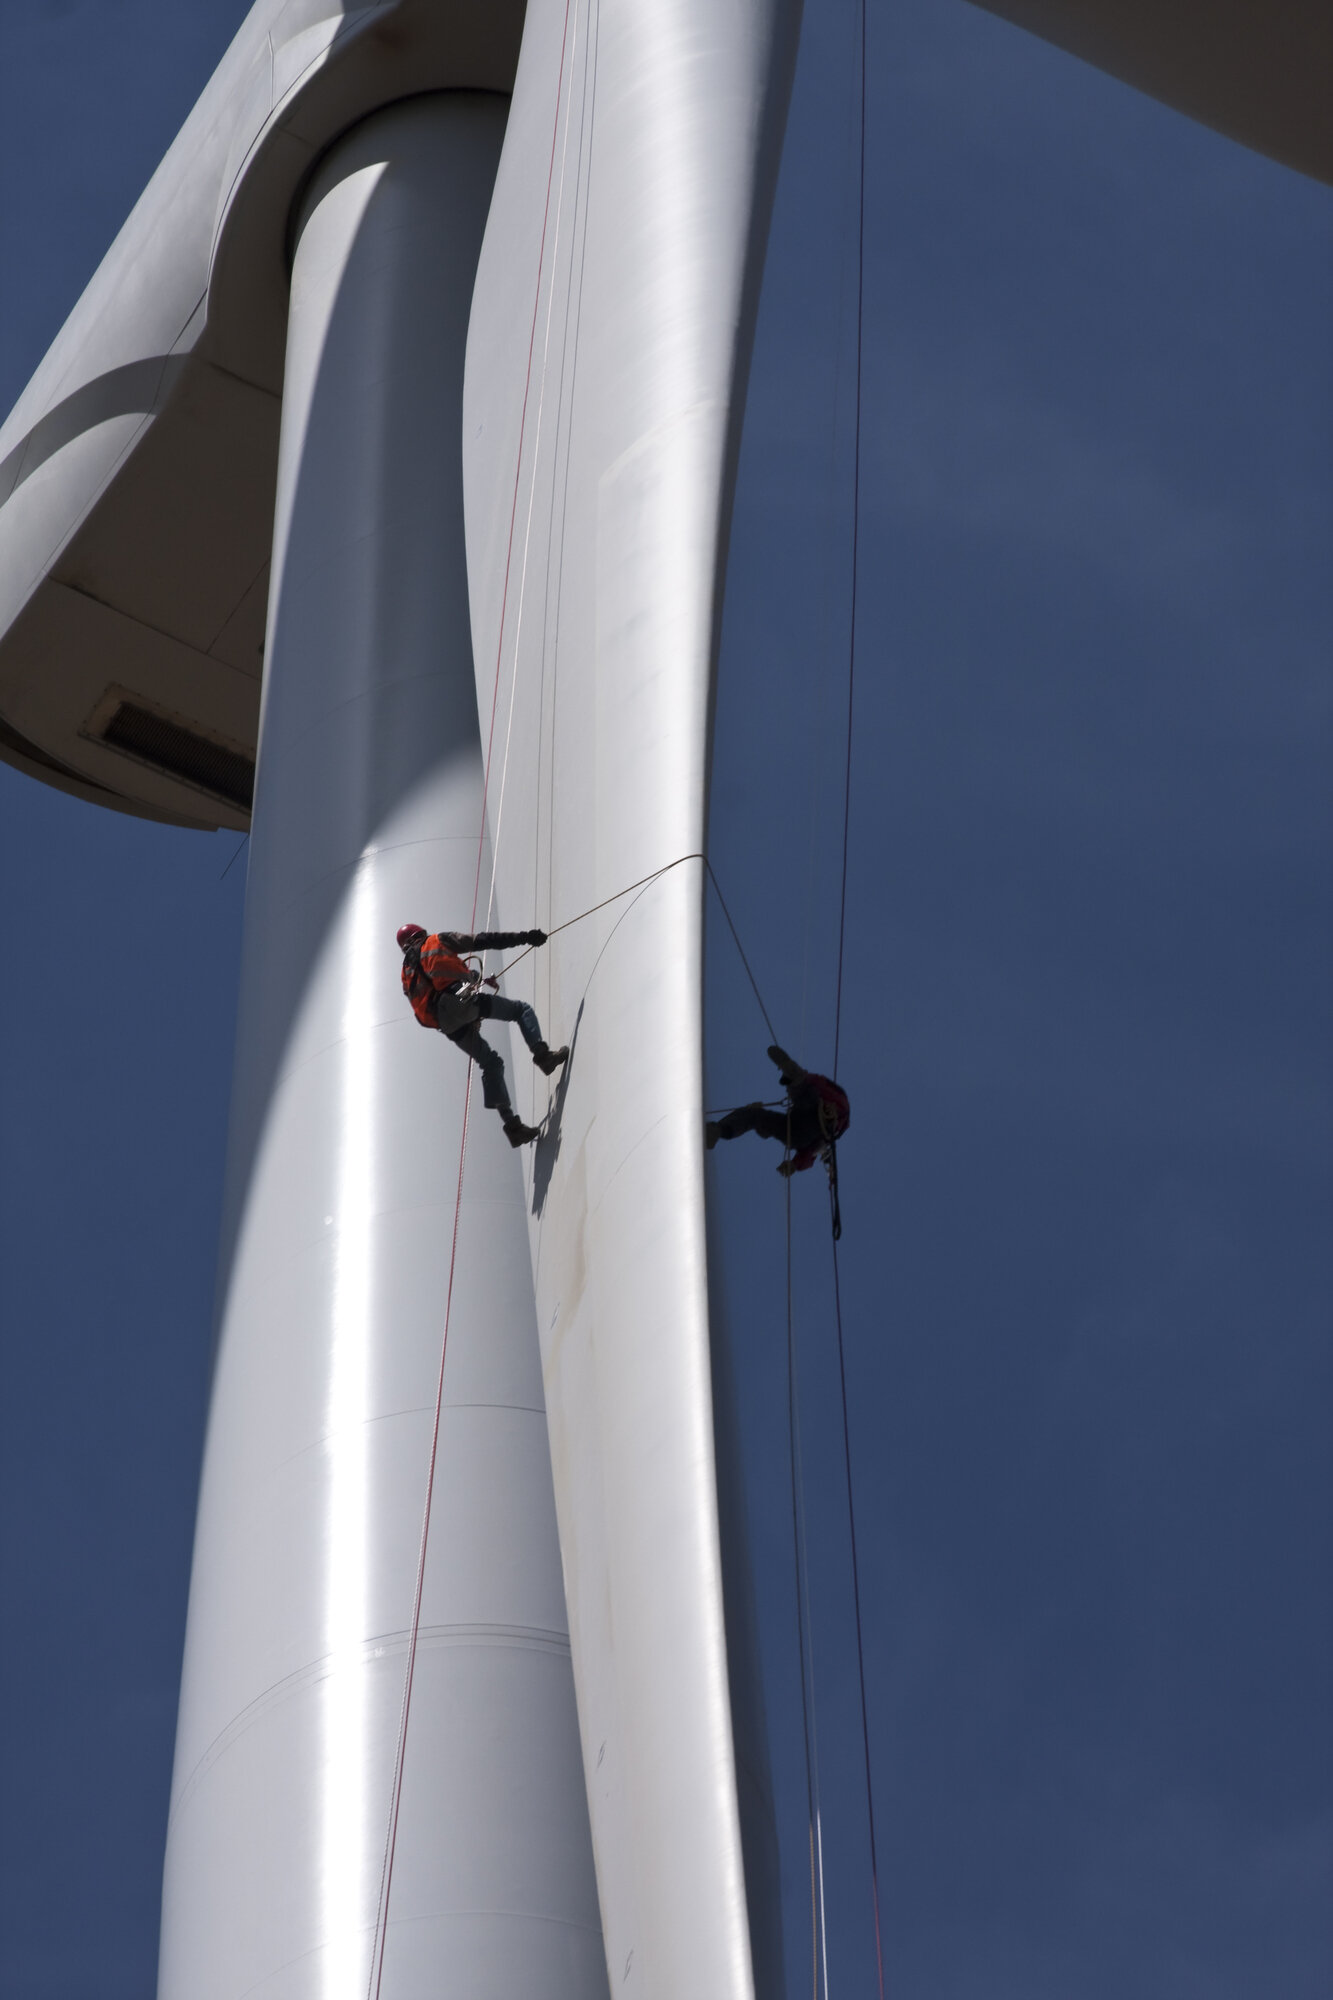 Expert blade service solutions for all your wind turbines